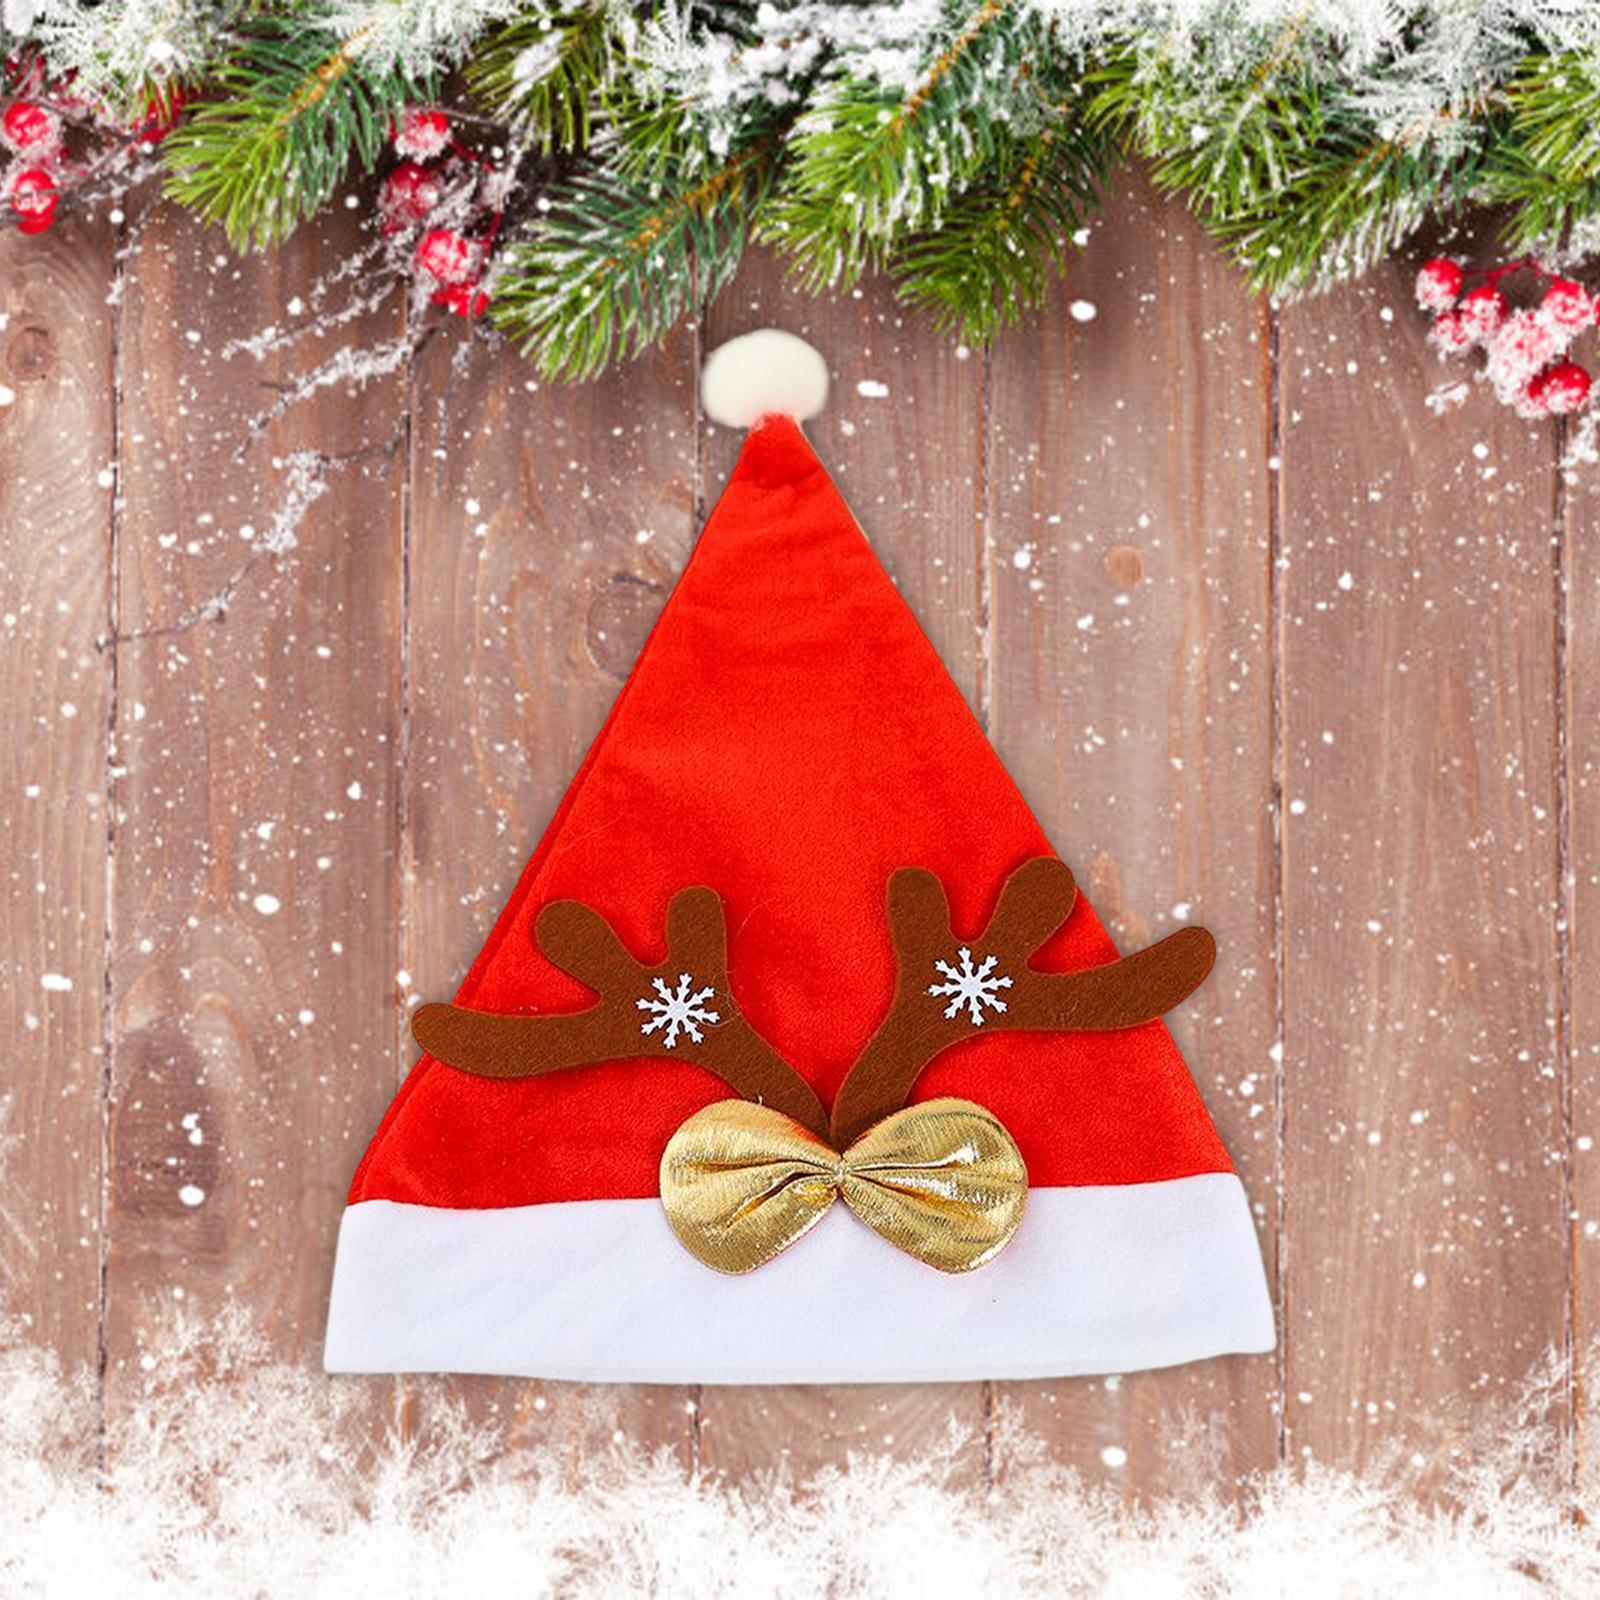 Antler Hat Red Santa Claus Xmas Hat Cap for Masquerade Stage Performance